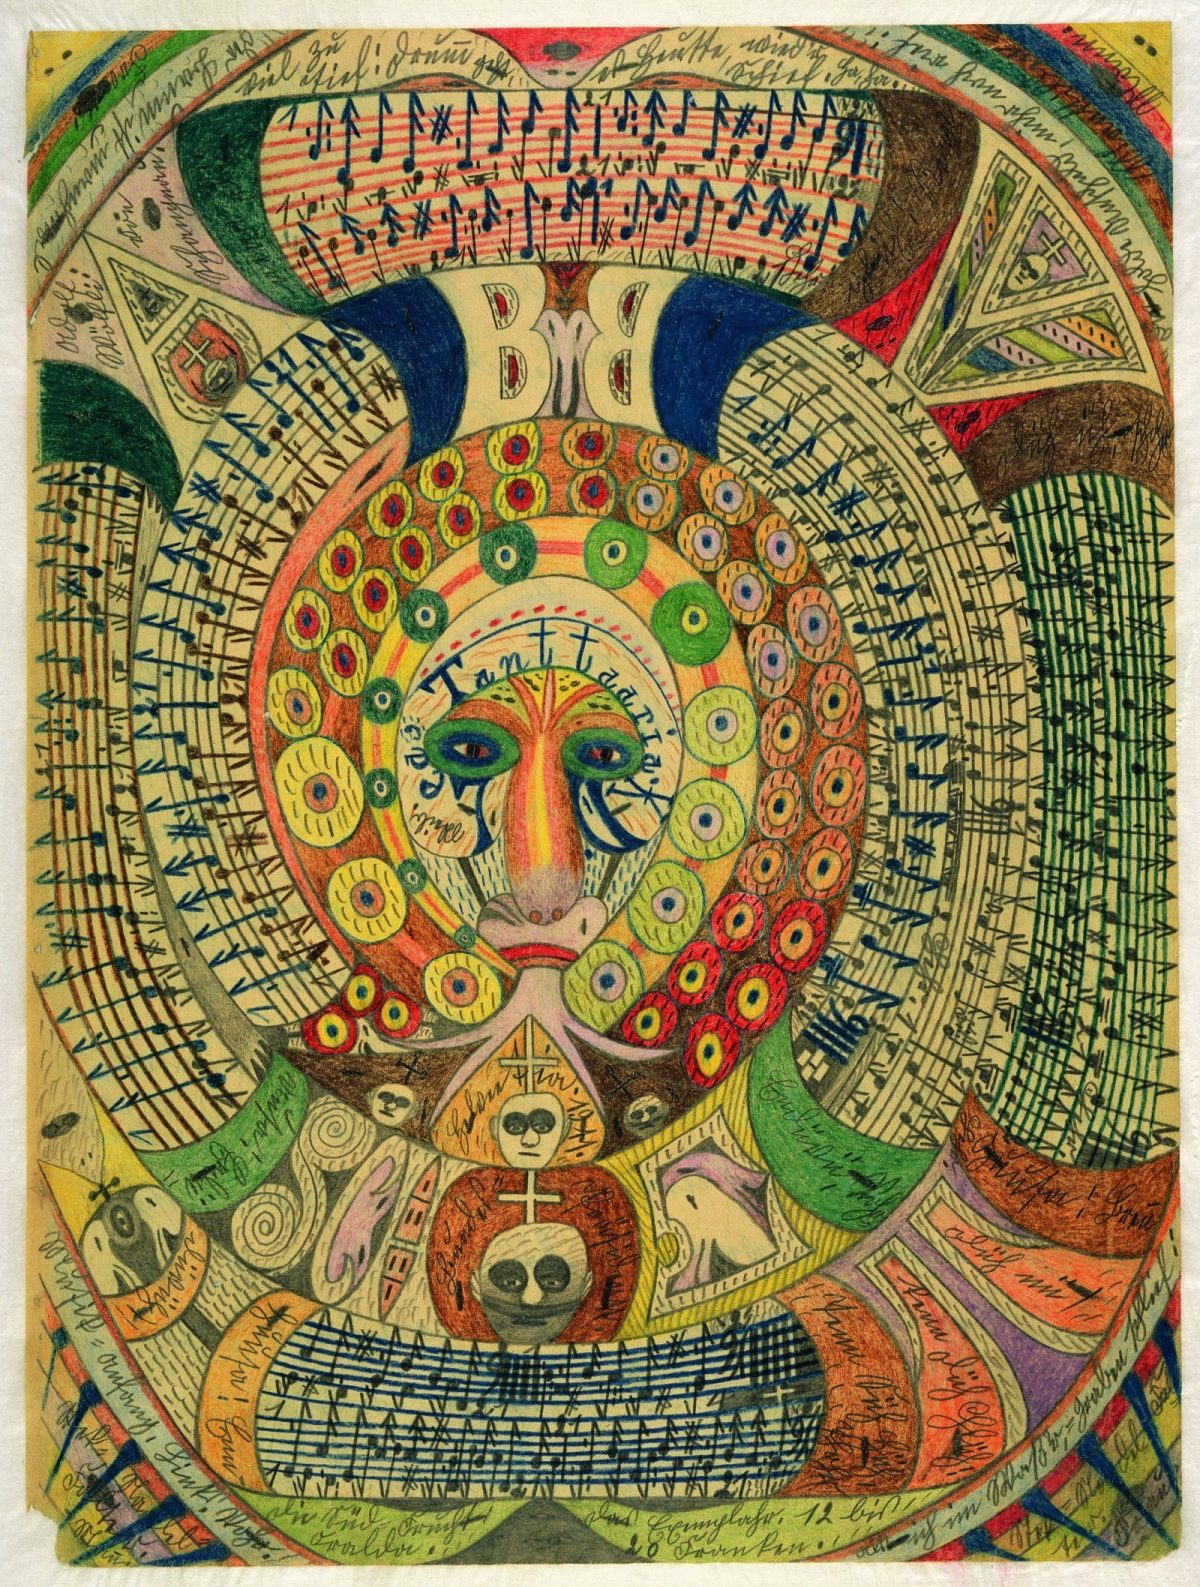 Wölfli was a psychiatric patient at the hospital in Waldau but also a prominent exponent of Art Brut.  At the hospital, Wölfli began drawing, writing, and composing music.